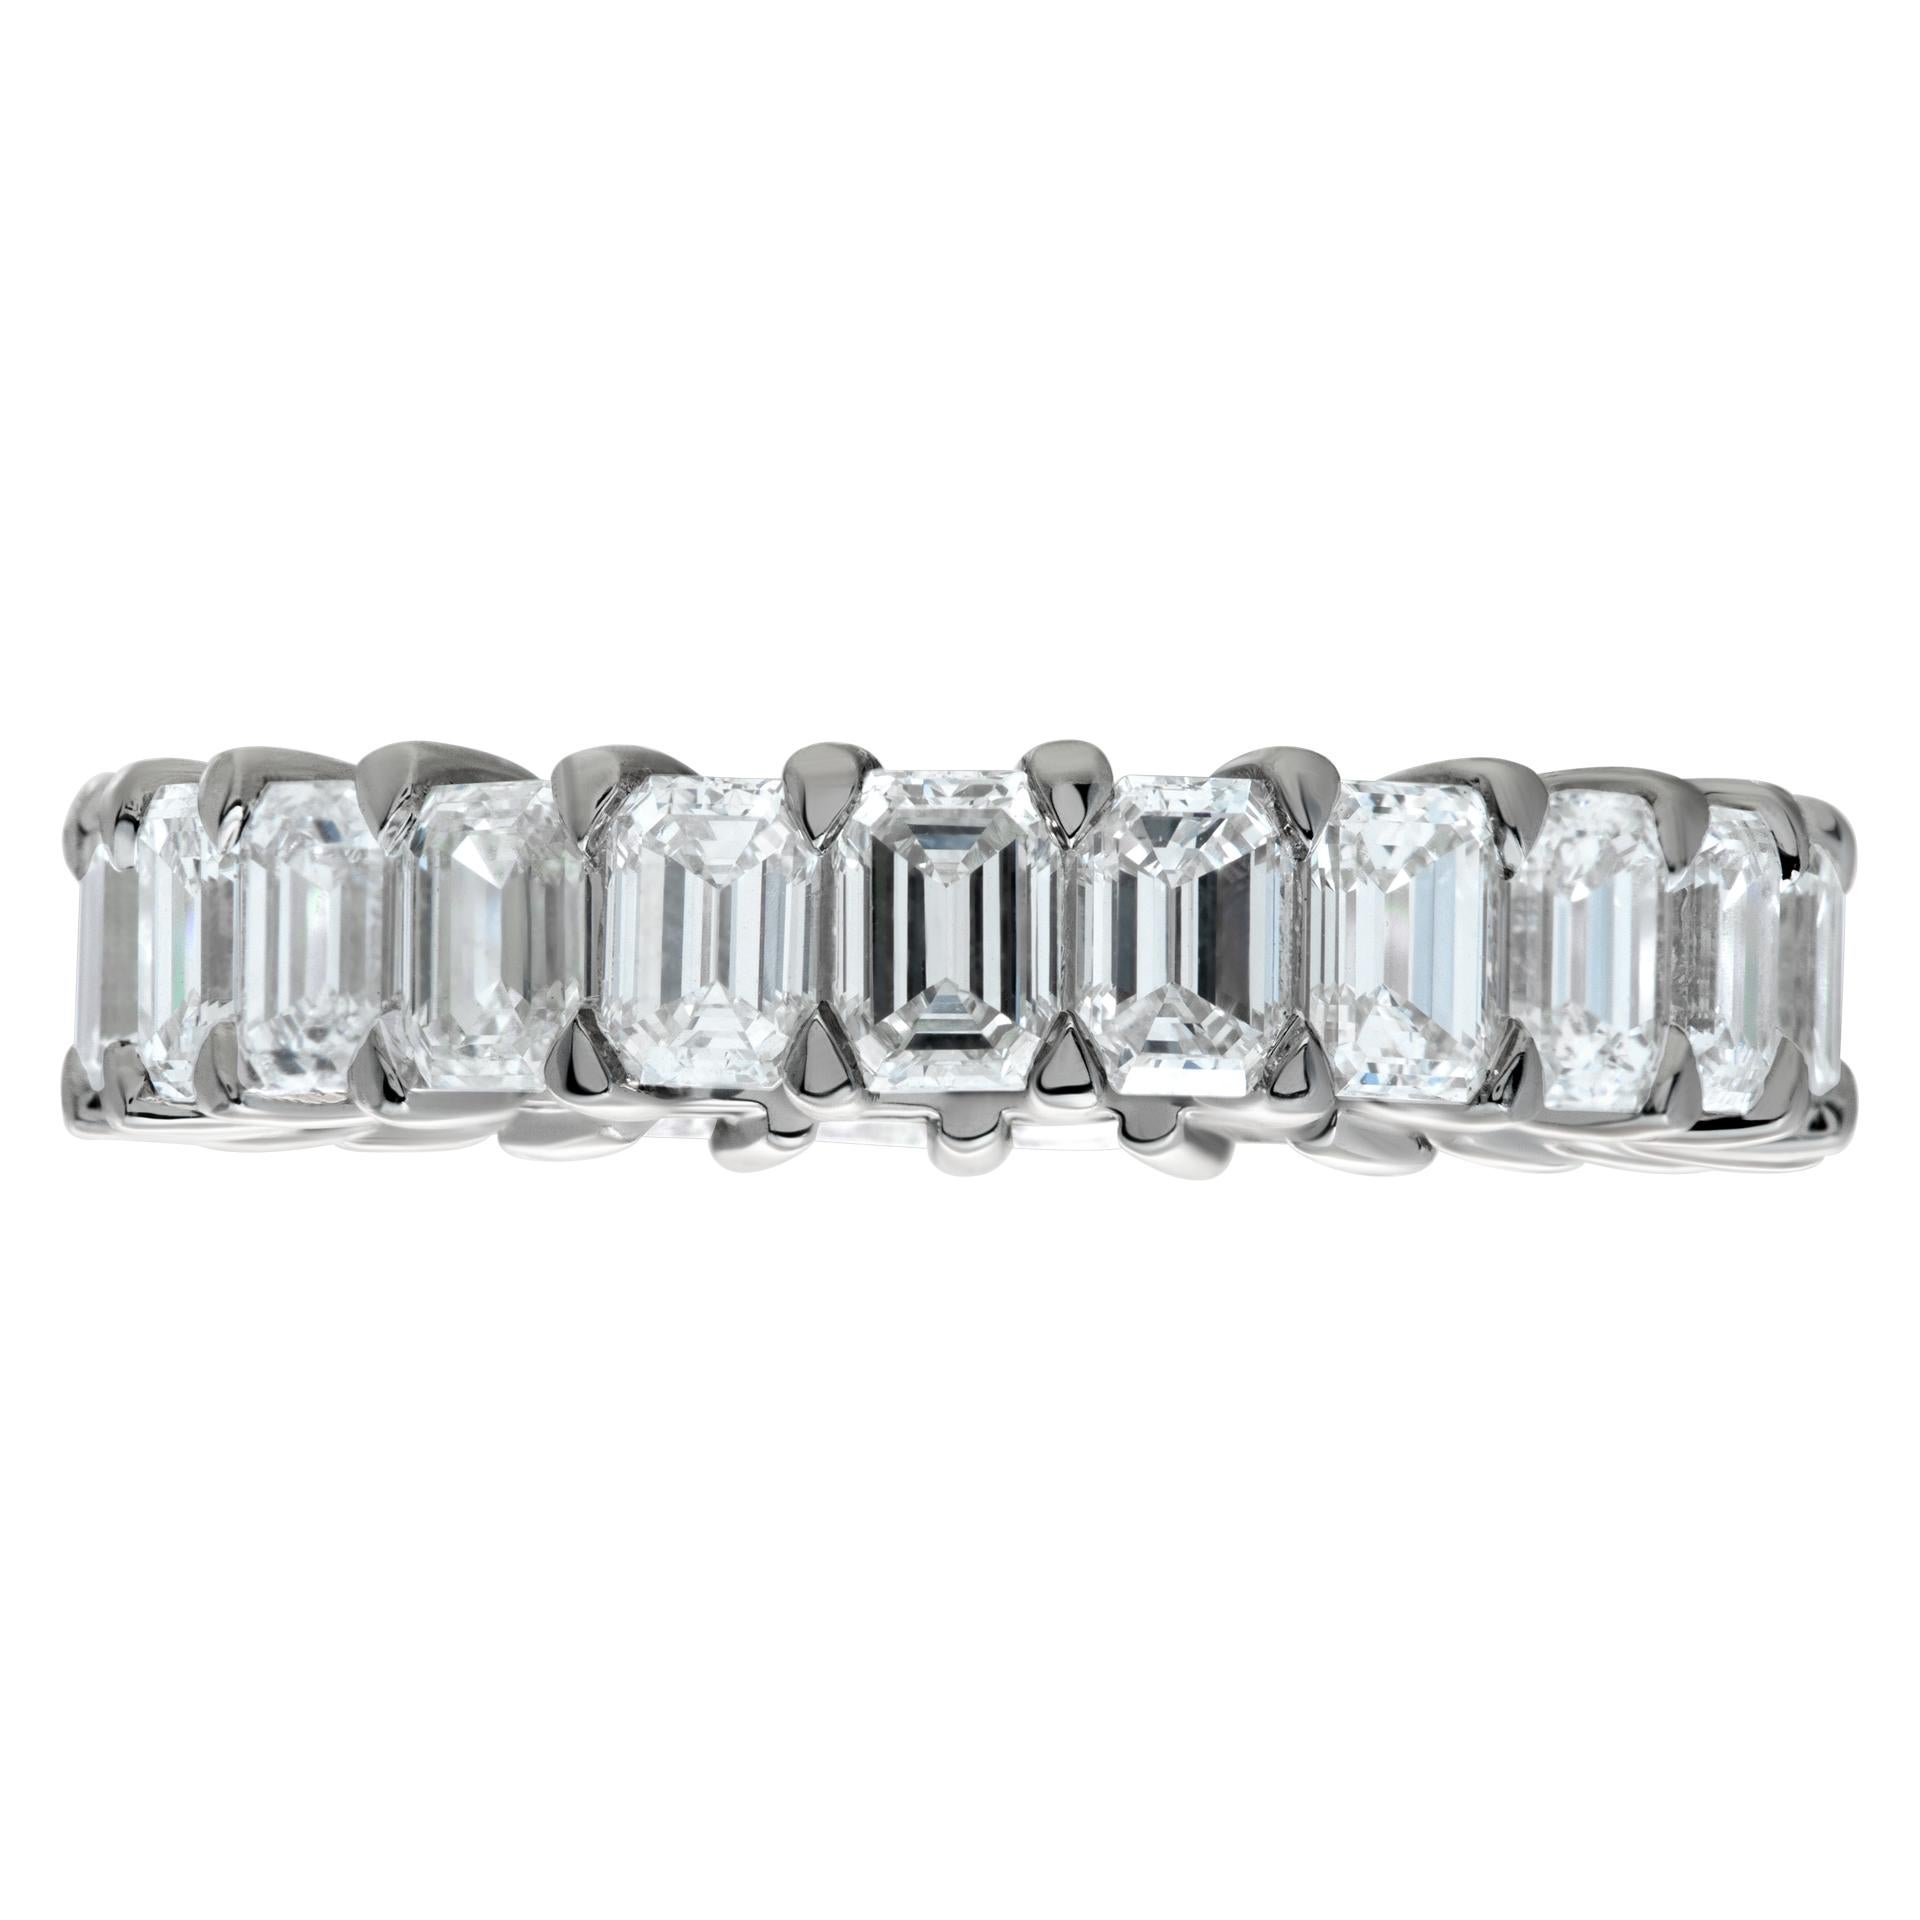 Emerald cut diamond eternity band 4.25 carats in G-H color, VS clarity diamonds set in platinum. Size 6.5, width 4.5mm.
